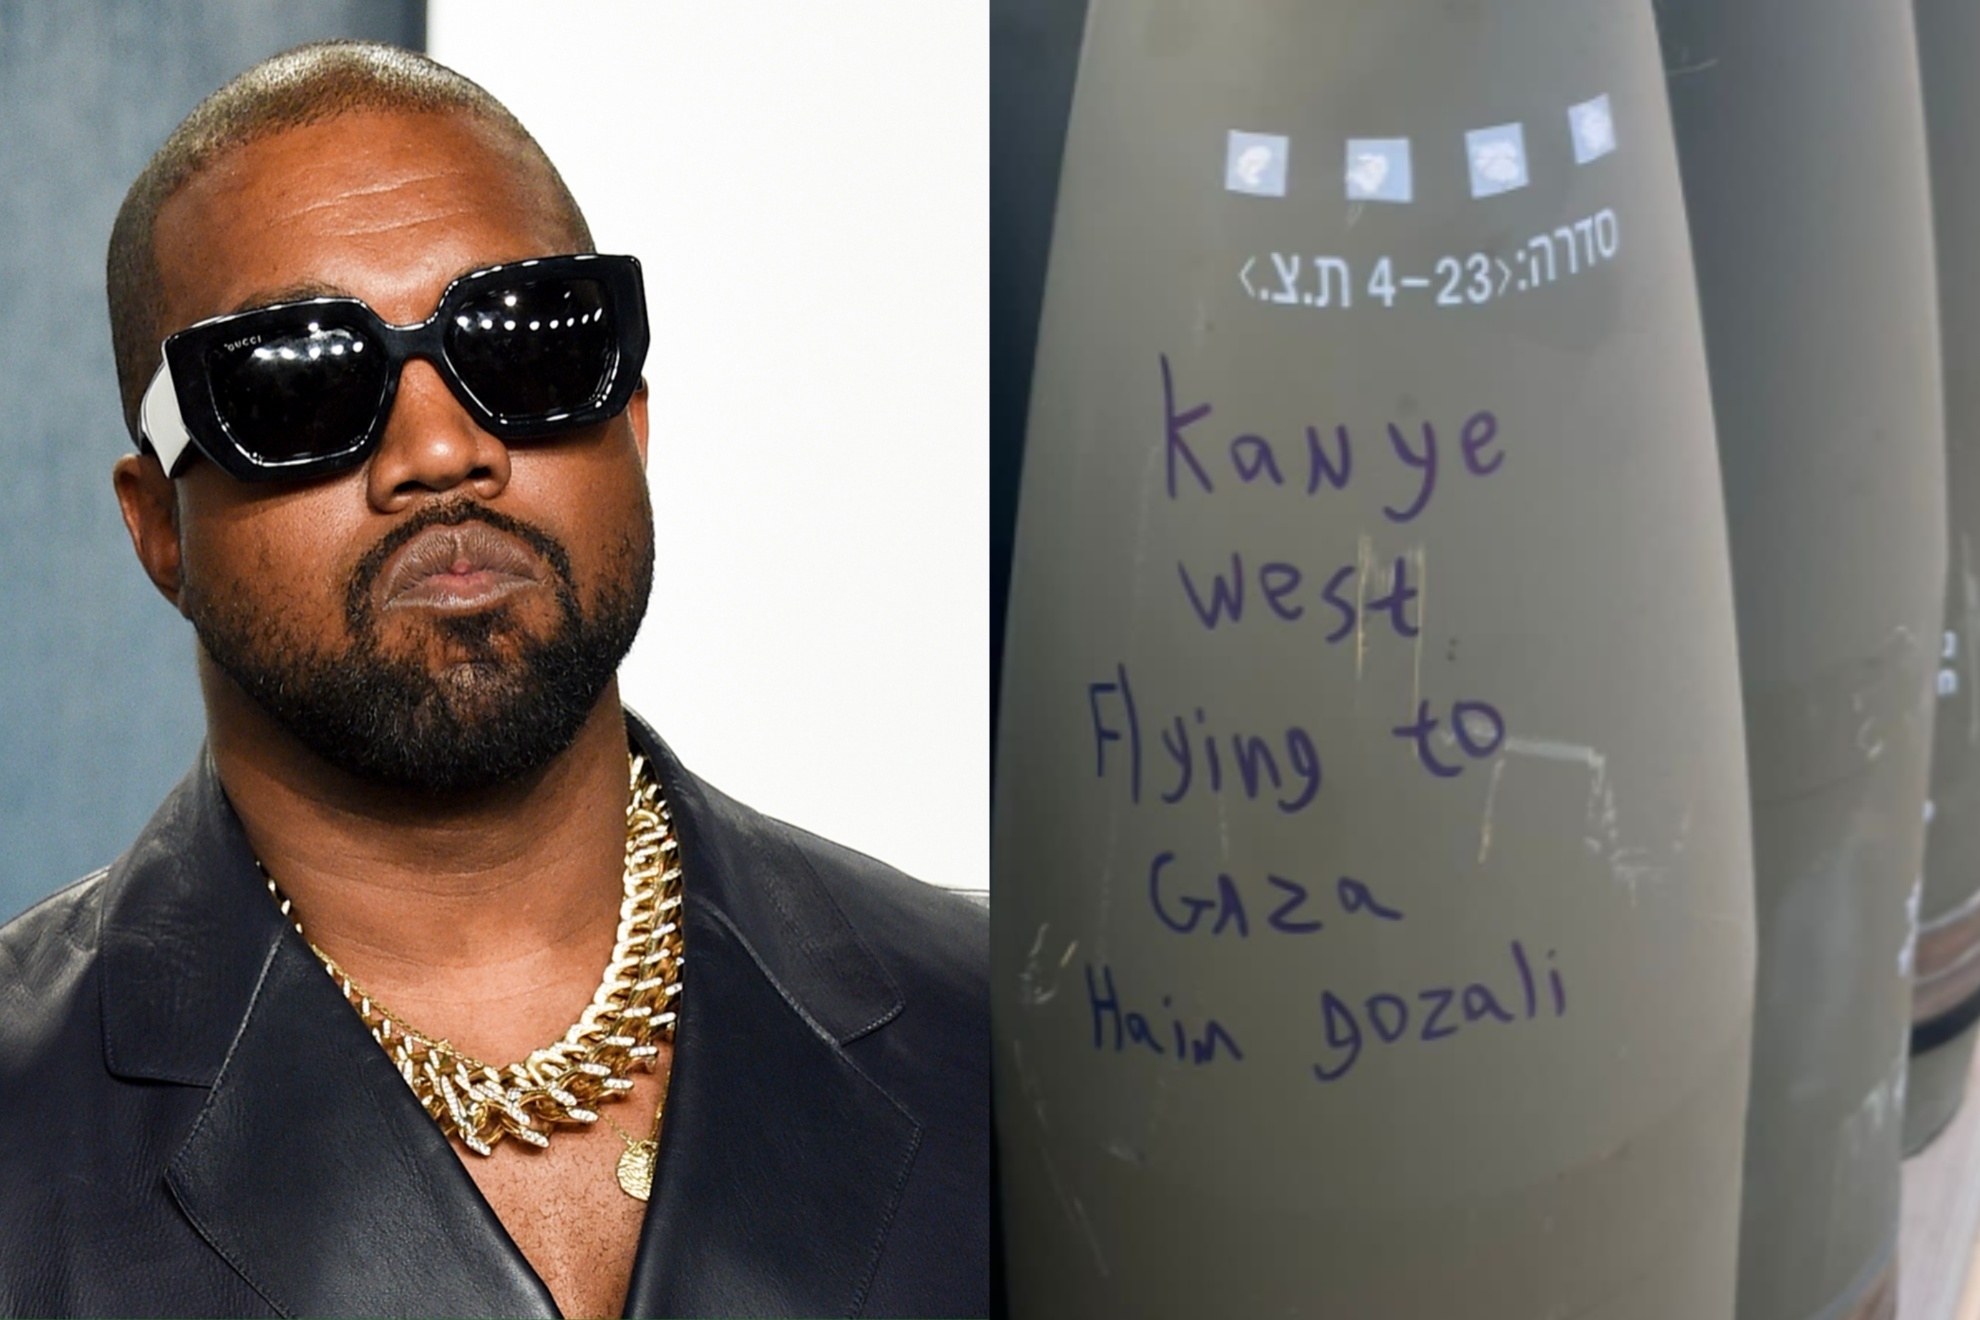 Kanye West has his name written on a missile heading to Gaza